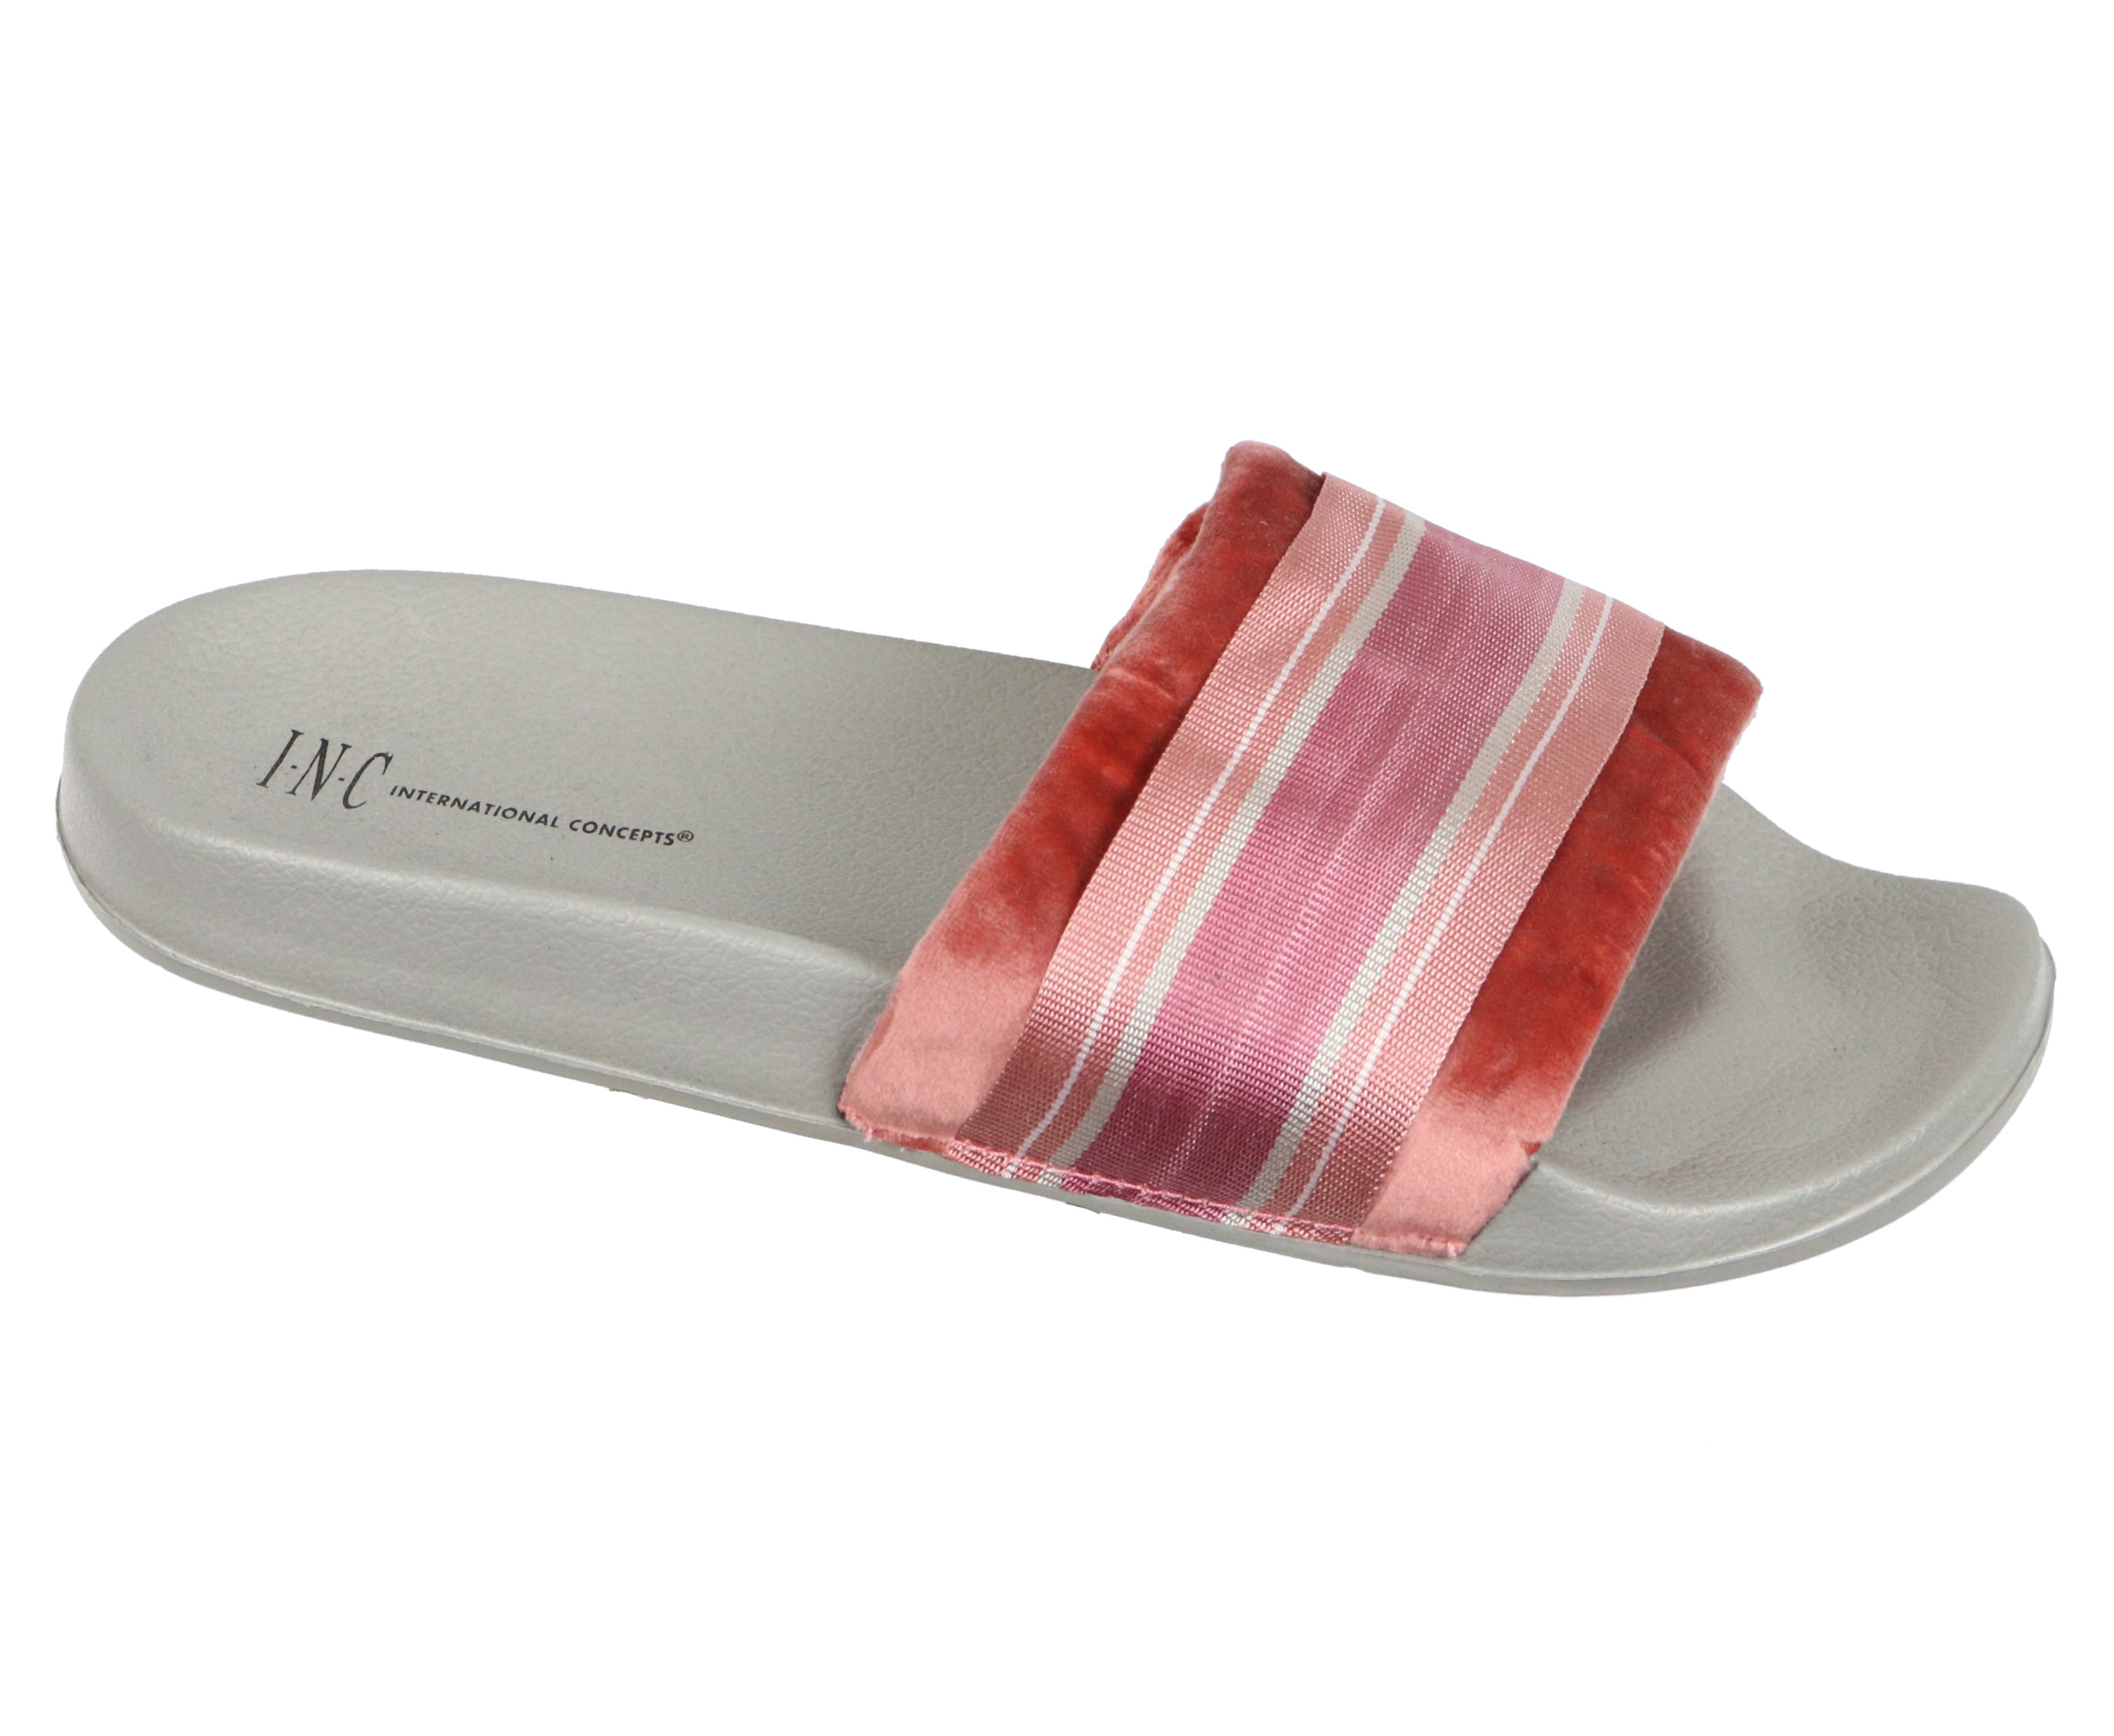 Details about   INC INTERNATIONAL CONCEPTS KNOTTED POOL SLIDES SLIPPERS LIGHT PINK XL 11-12